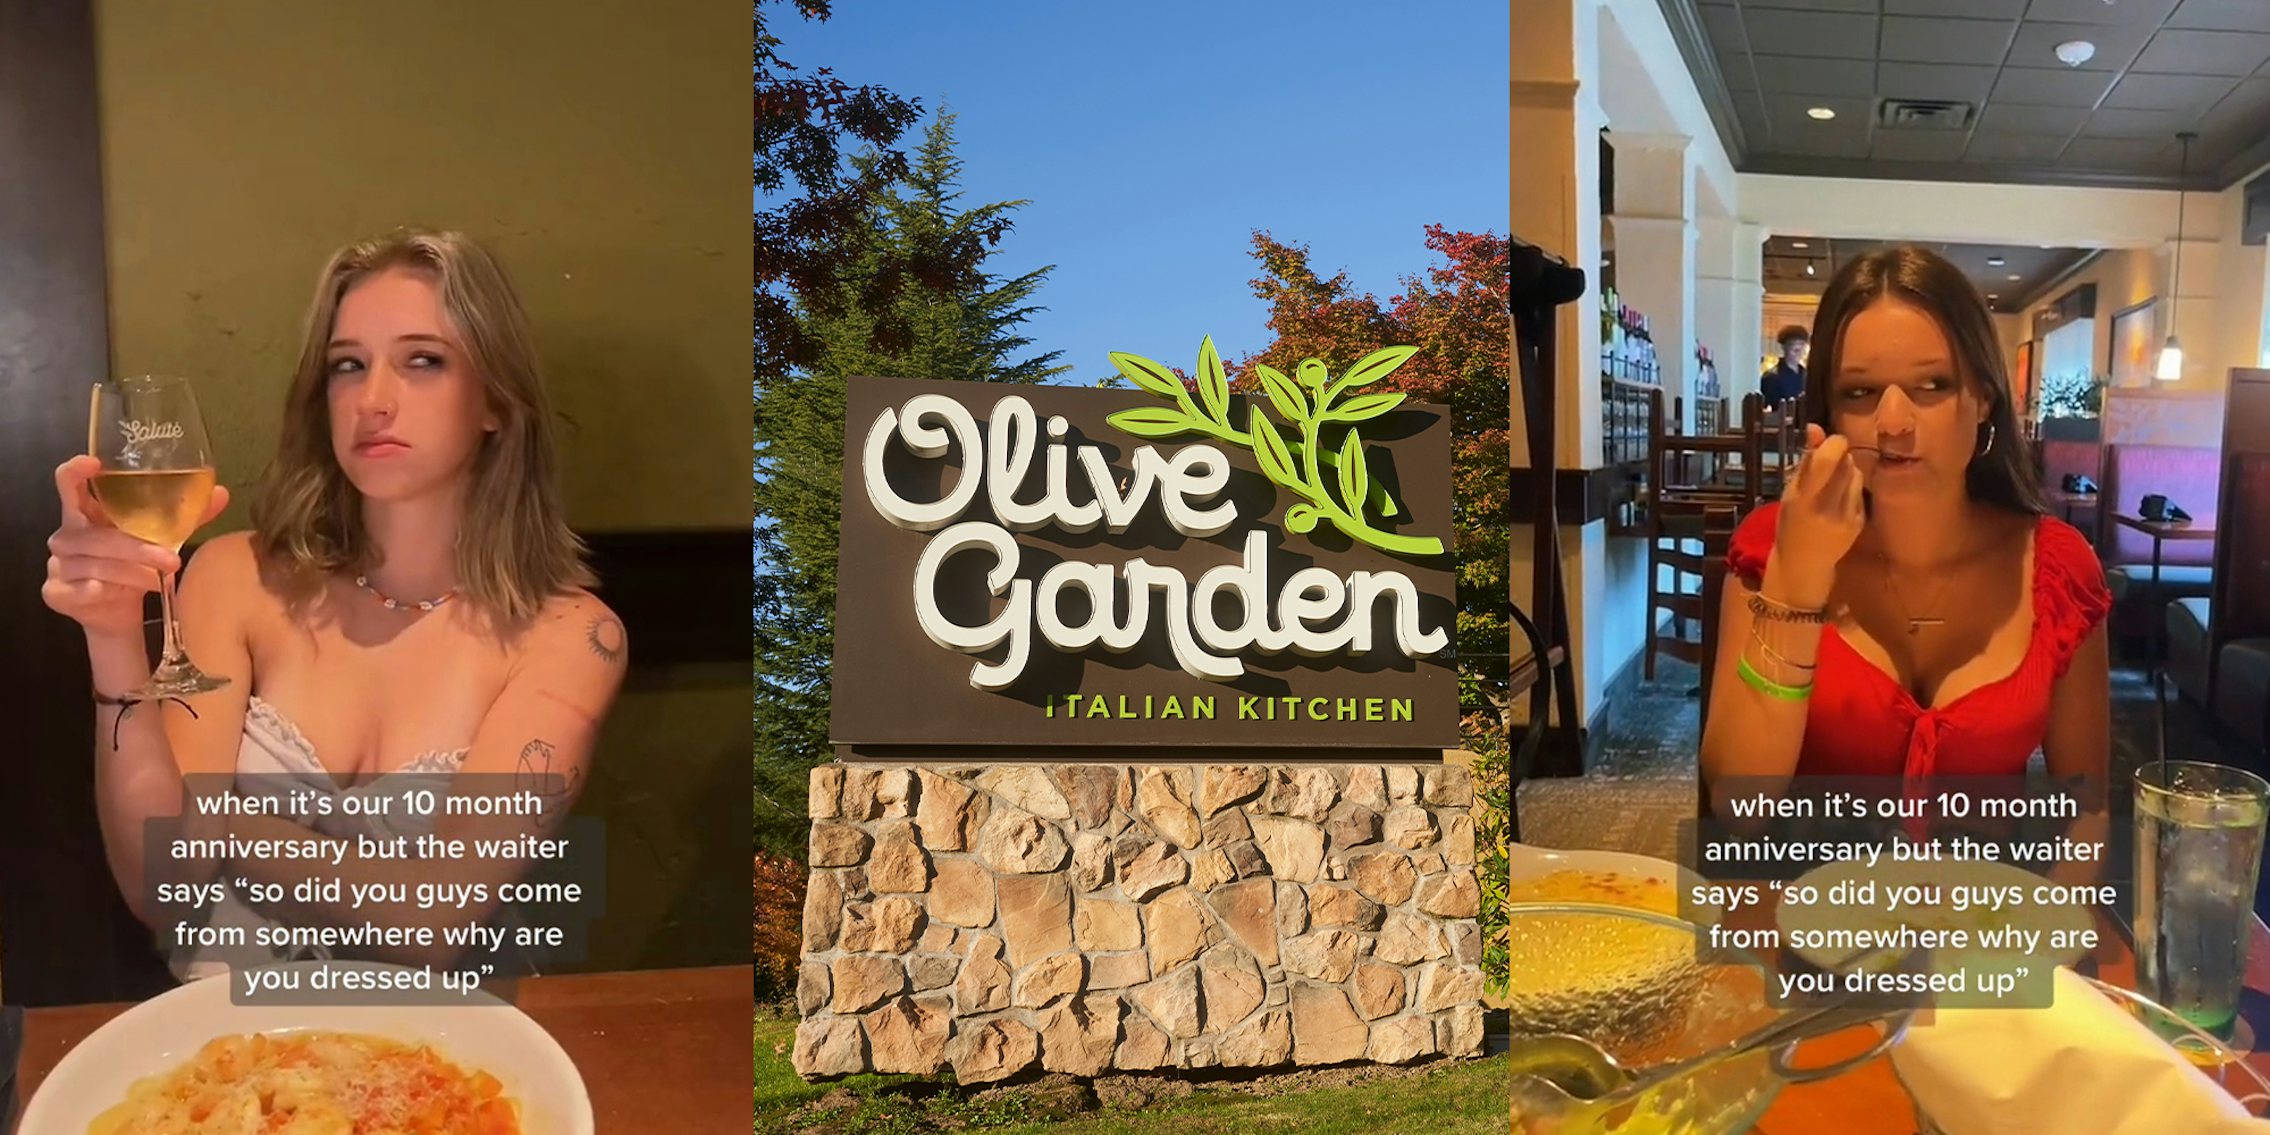 Young couple has anniversary dinner at Olive Garden. Waiter asks why she’s so dressed up, assuming they’re straight